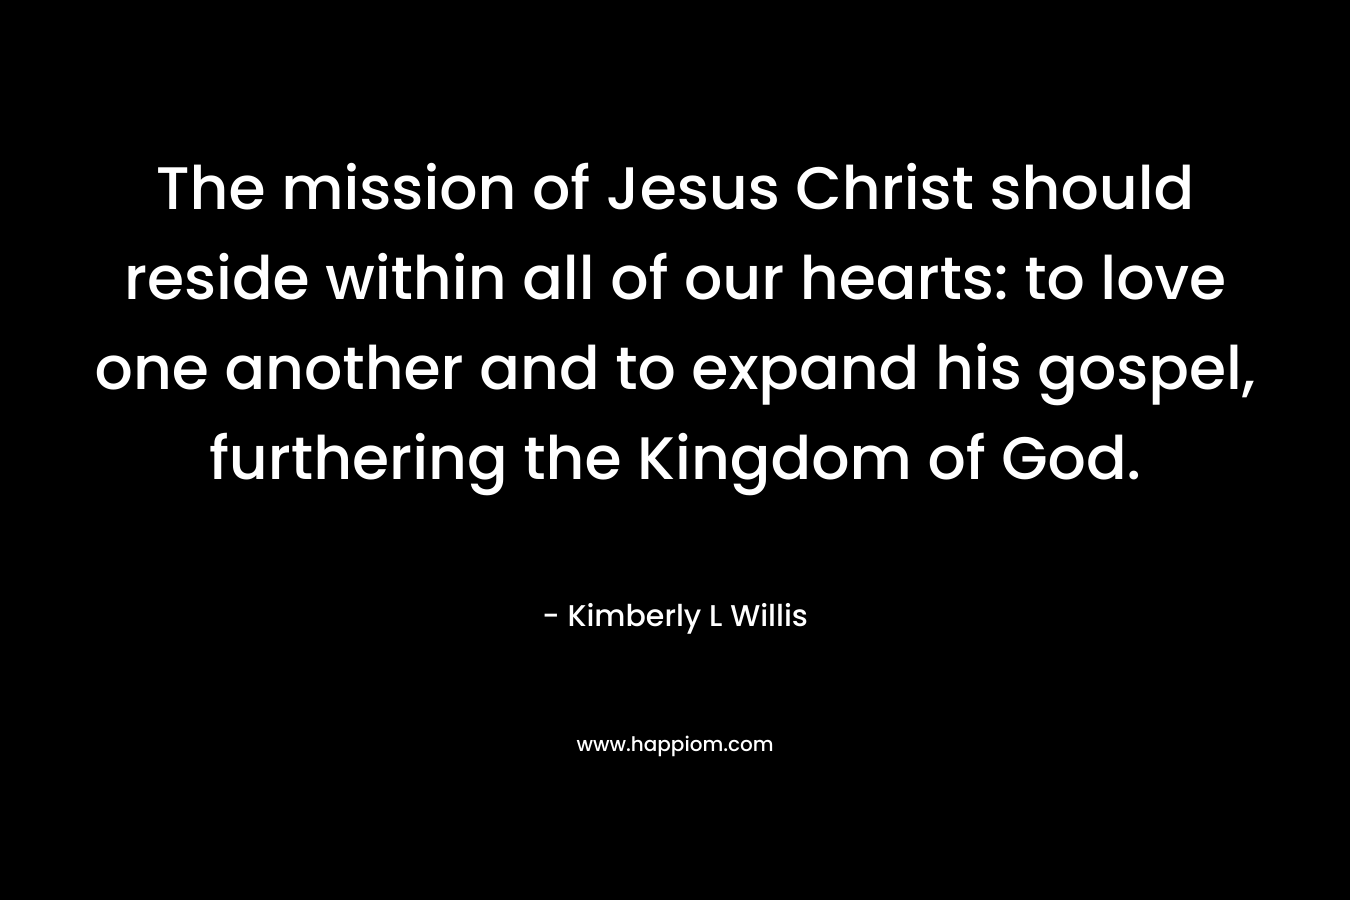 The mission of Jesus Christ should reside within all of our hearts: to love one another and to expand his gospel, furthering the Kingdom of God. – Kimberly L Willis